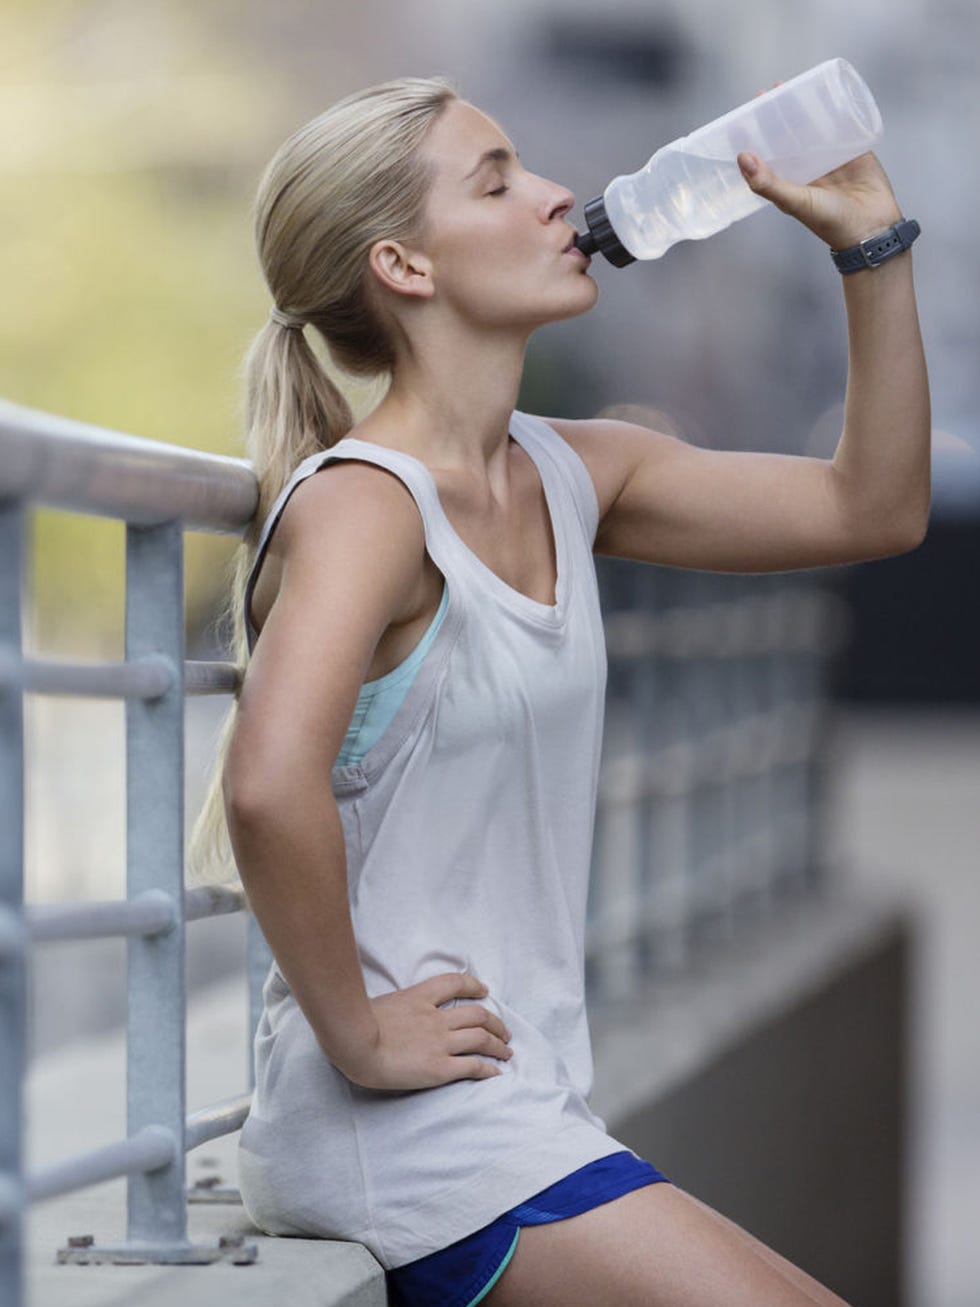 Water, Clothing, Undergarment, Beauty, Shoulder, Arm, Muscle, Blond, Leg, Drinking water, 